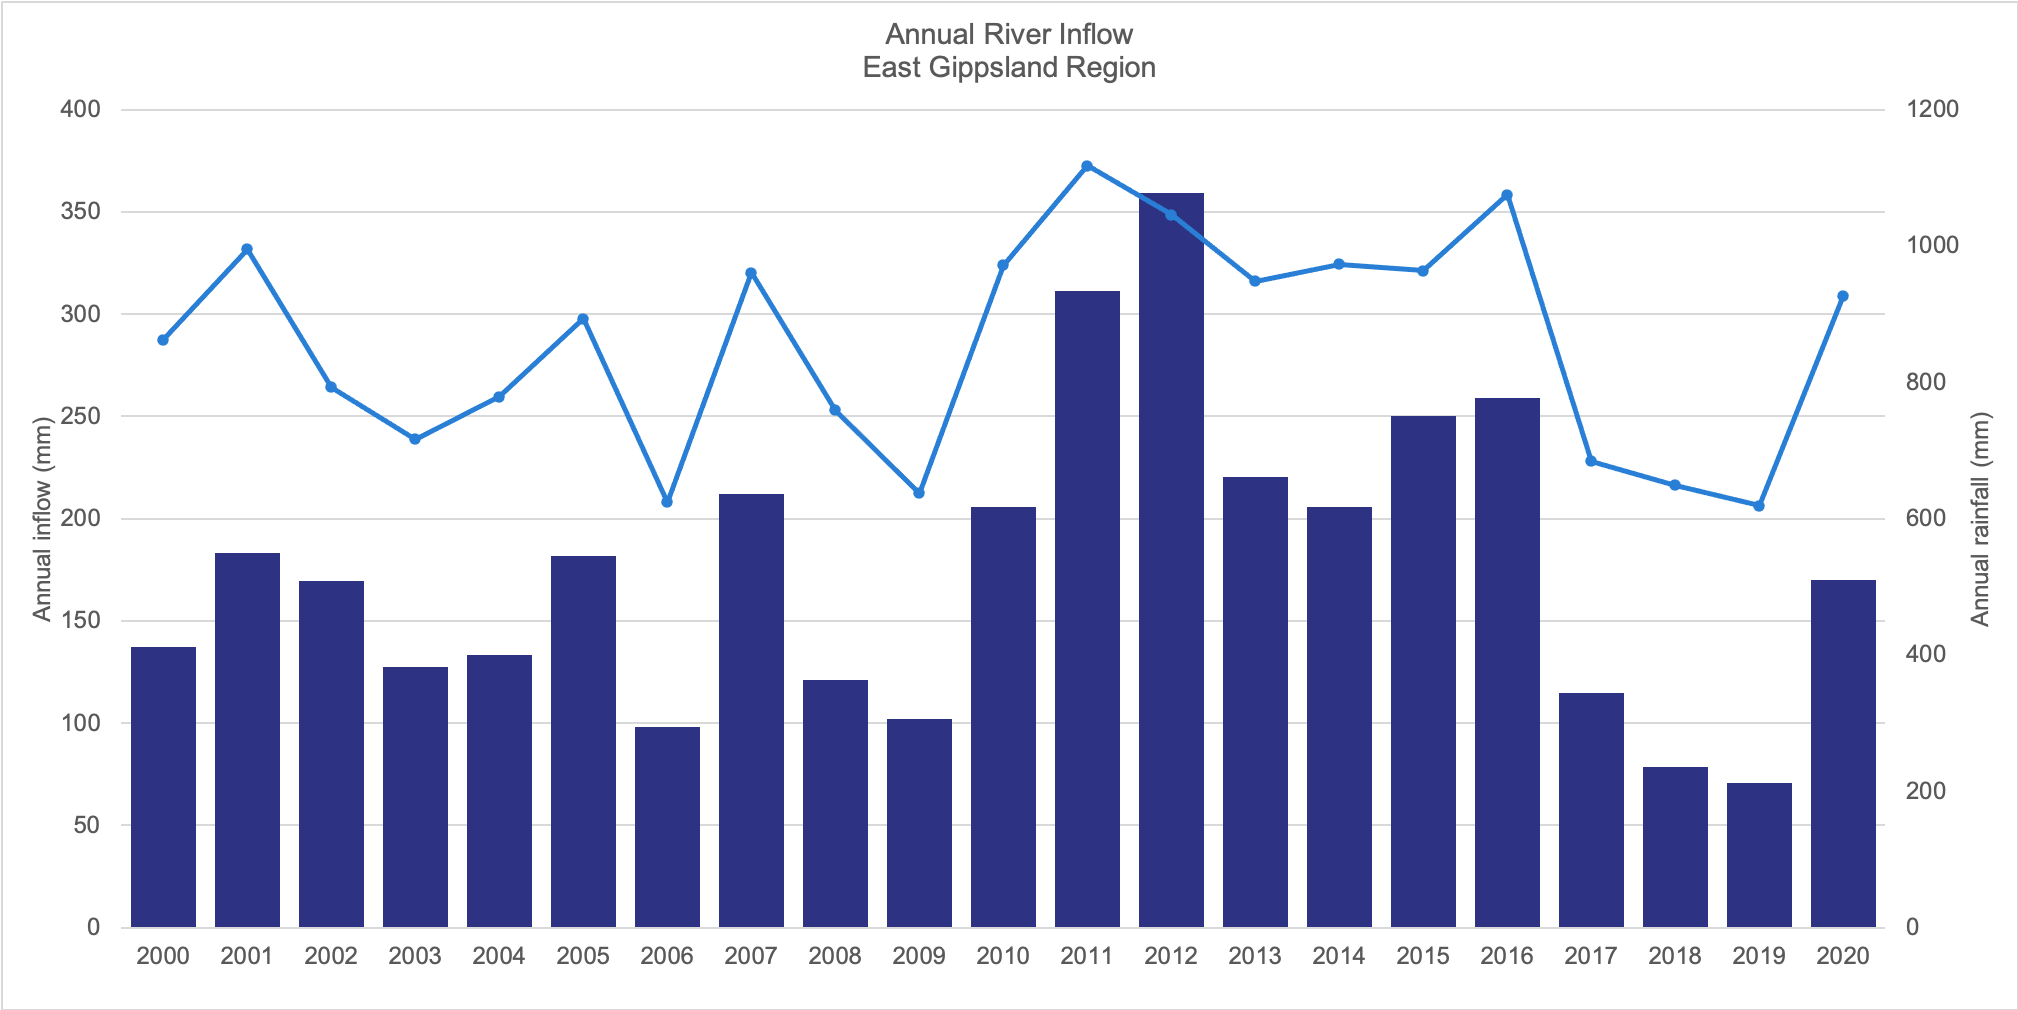 Annual river inflow and rainfall in the East Gippsland